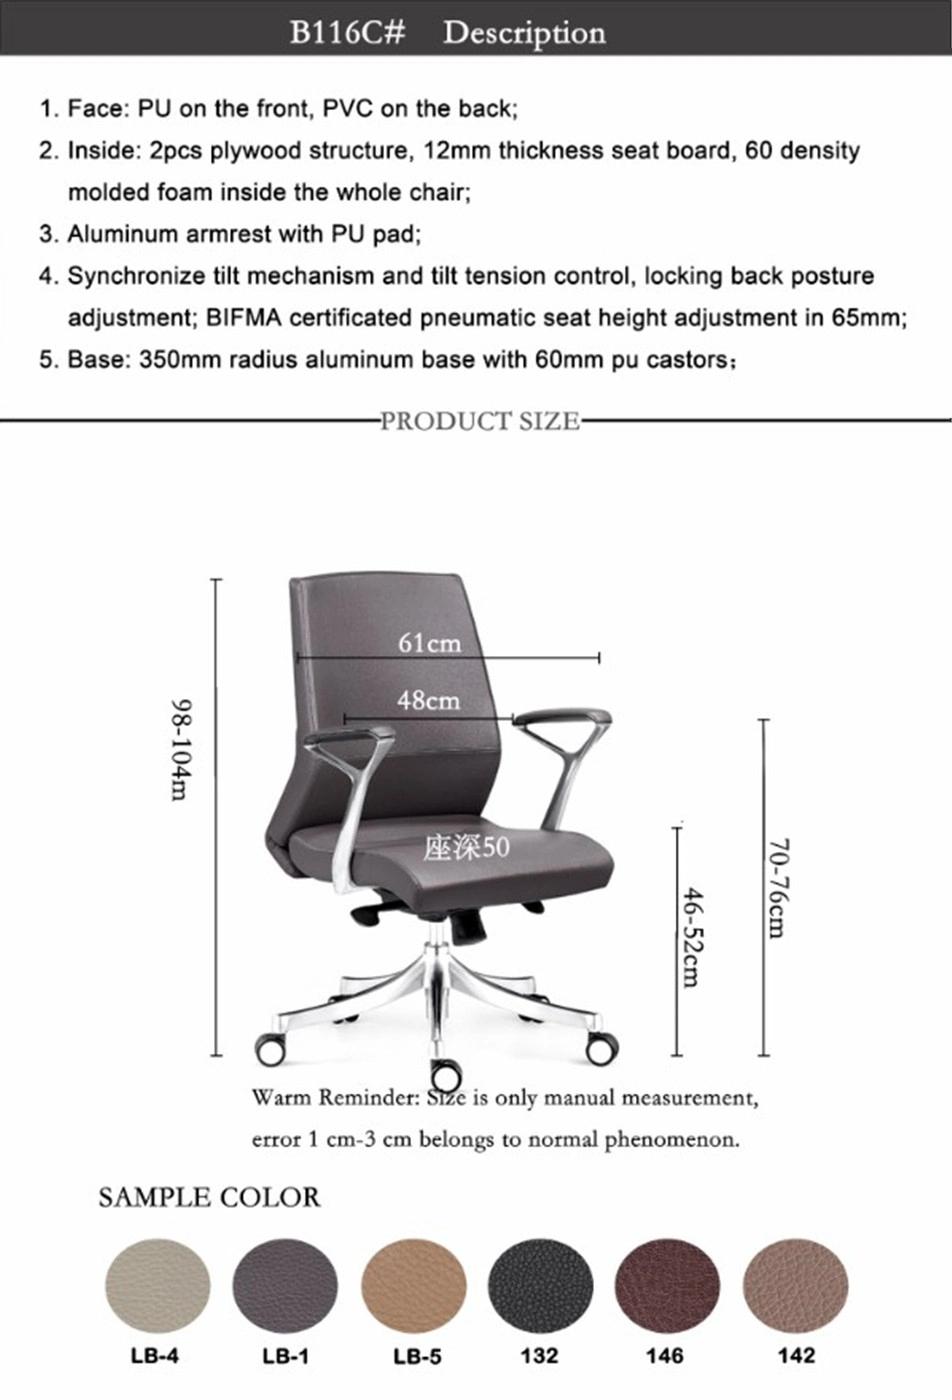 Modern Ergonomic Leather Computer Desk Office Works Study Chairs